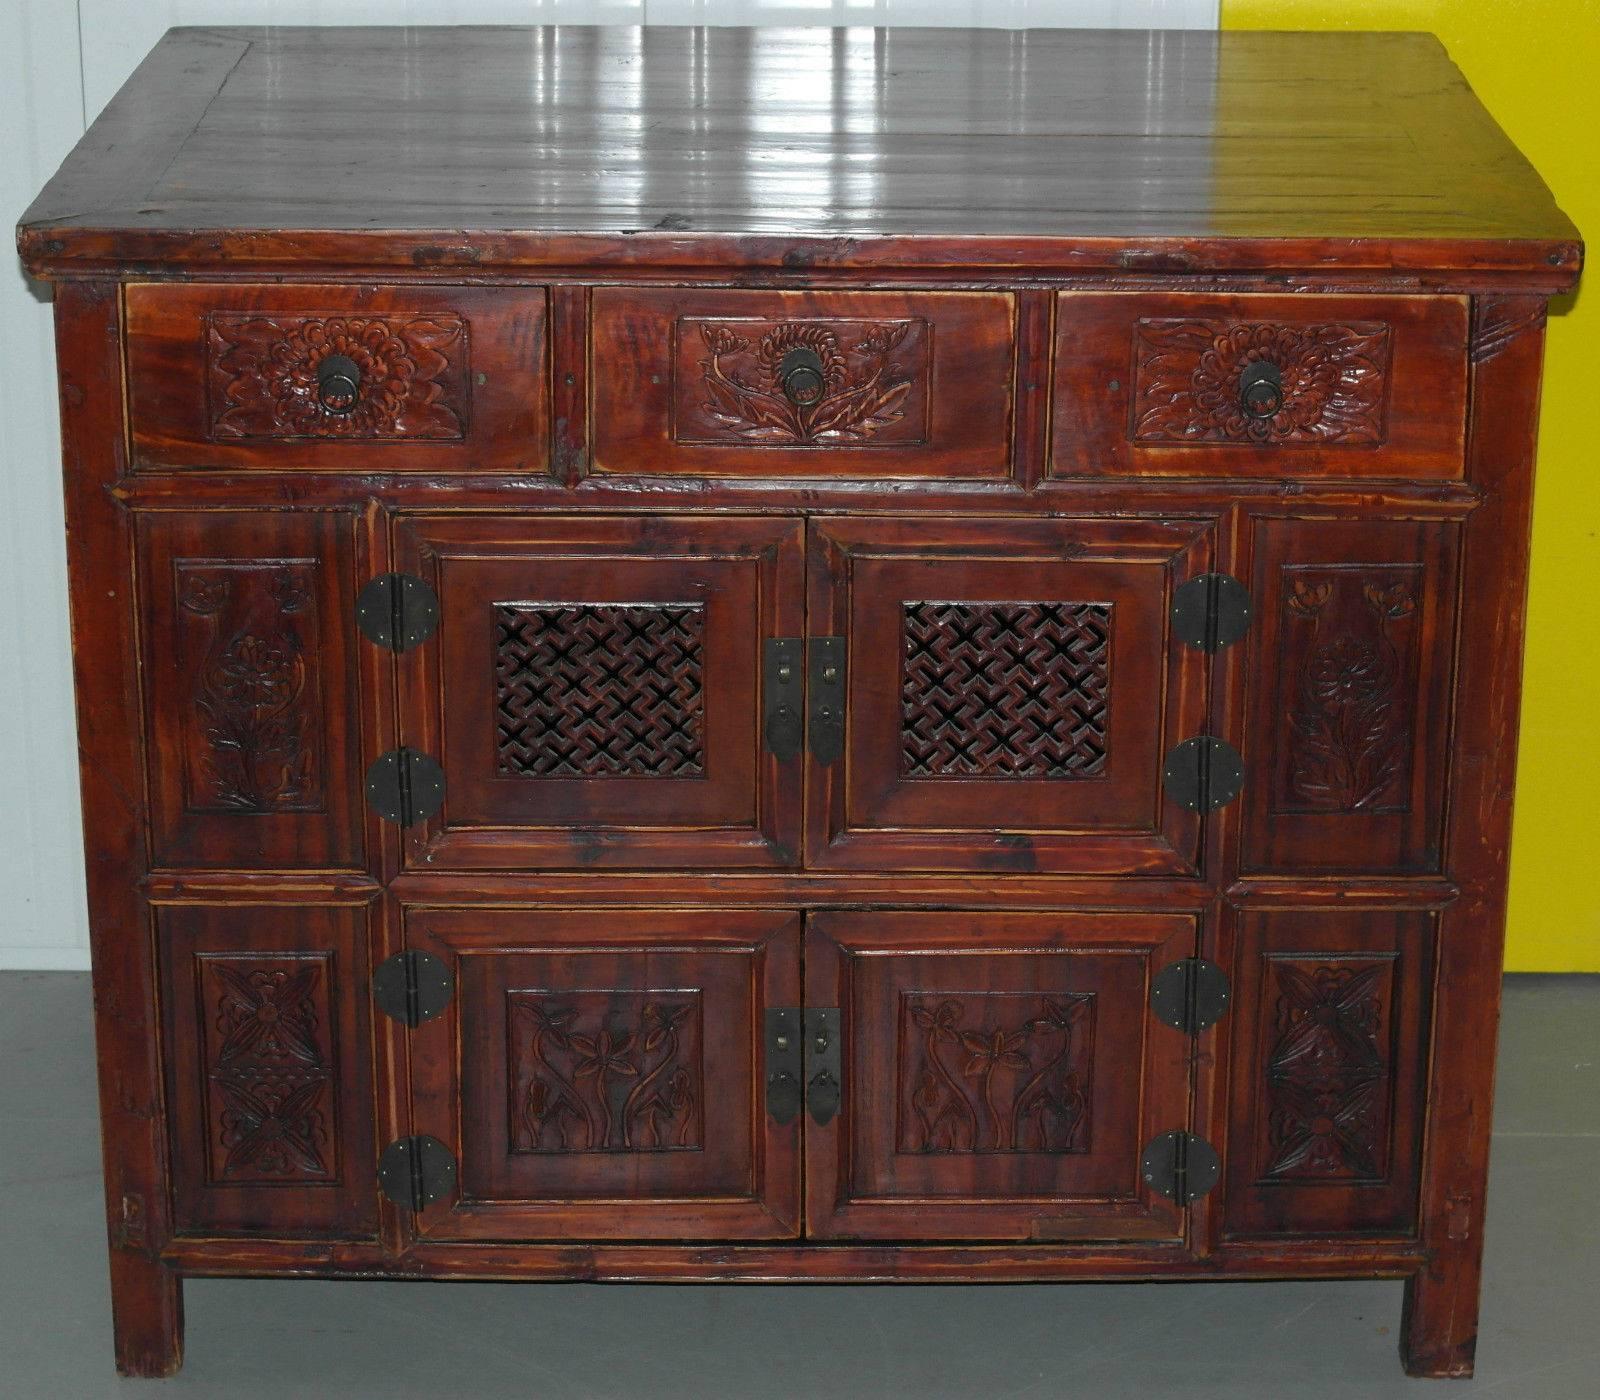 We are delighted to offer for sale this lovely antique style Chinese redwood bank of drawers, sideboard or entertainment stand

This piece is very rare in the sense of the depth, usually these are classed as opium cabinets which is the Chinese